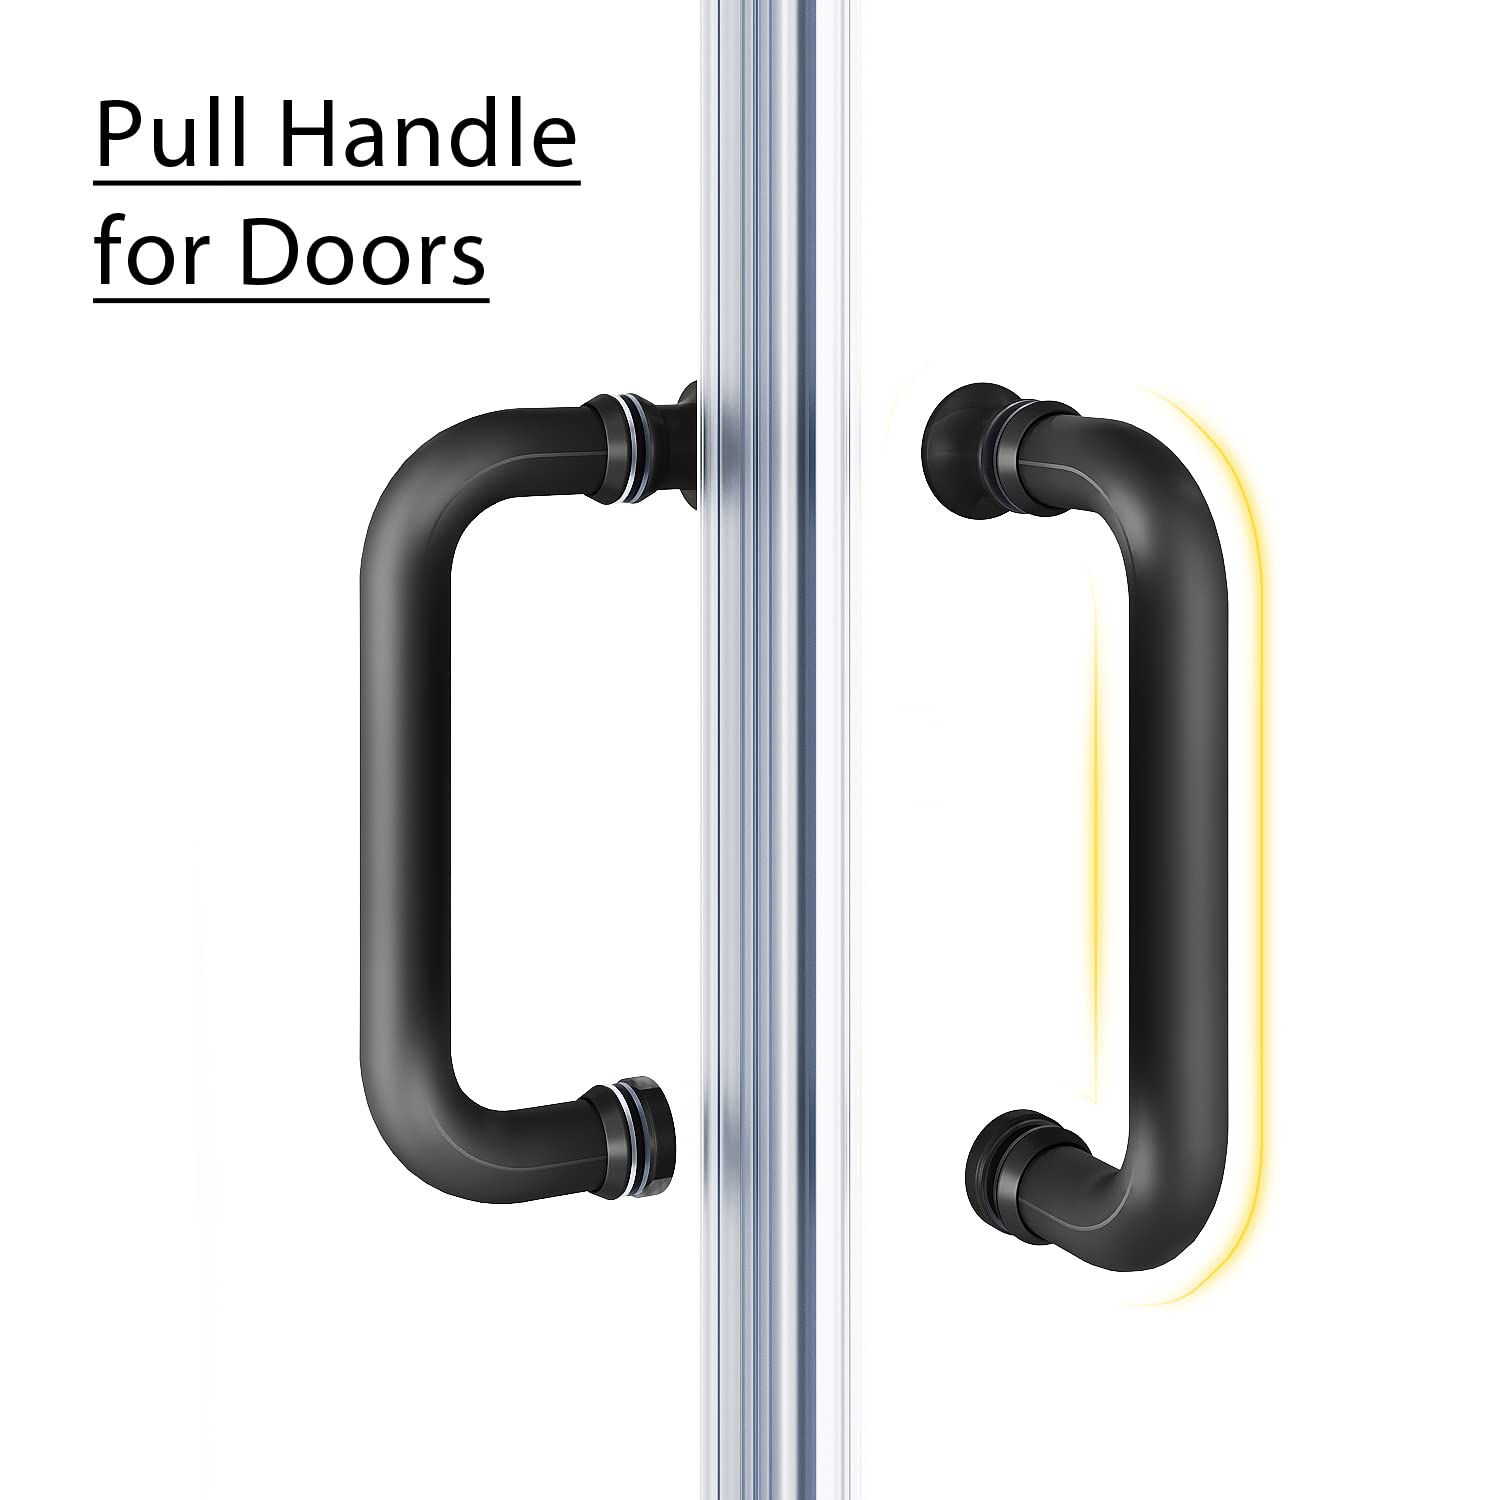 The double sliding door design that can be installed left and right not only expands the space of the shower room, but also makes the walk-in space larger and more convenient.